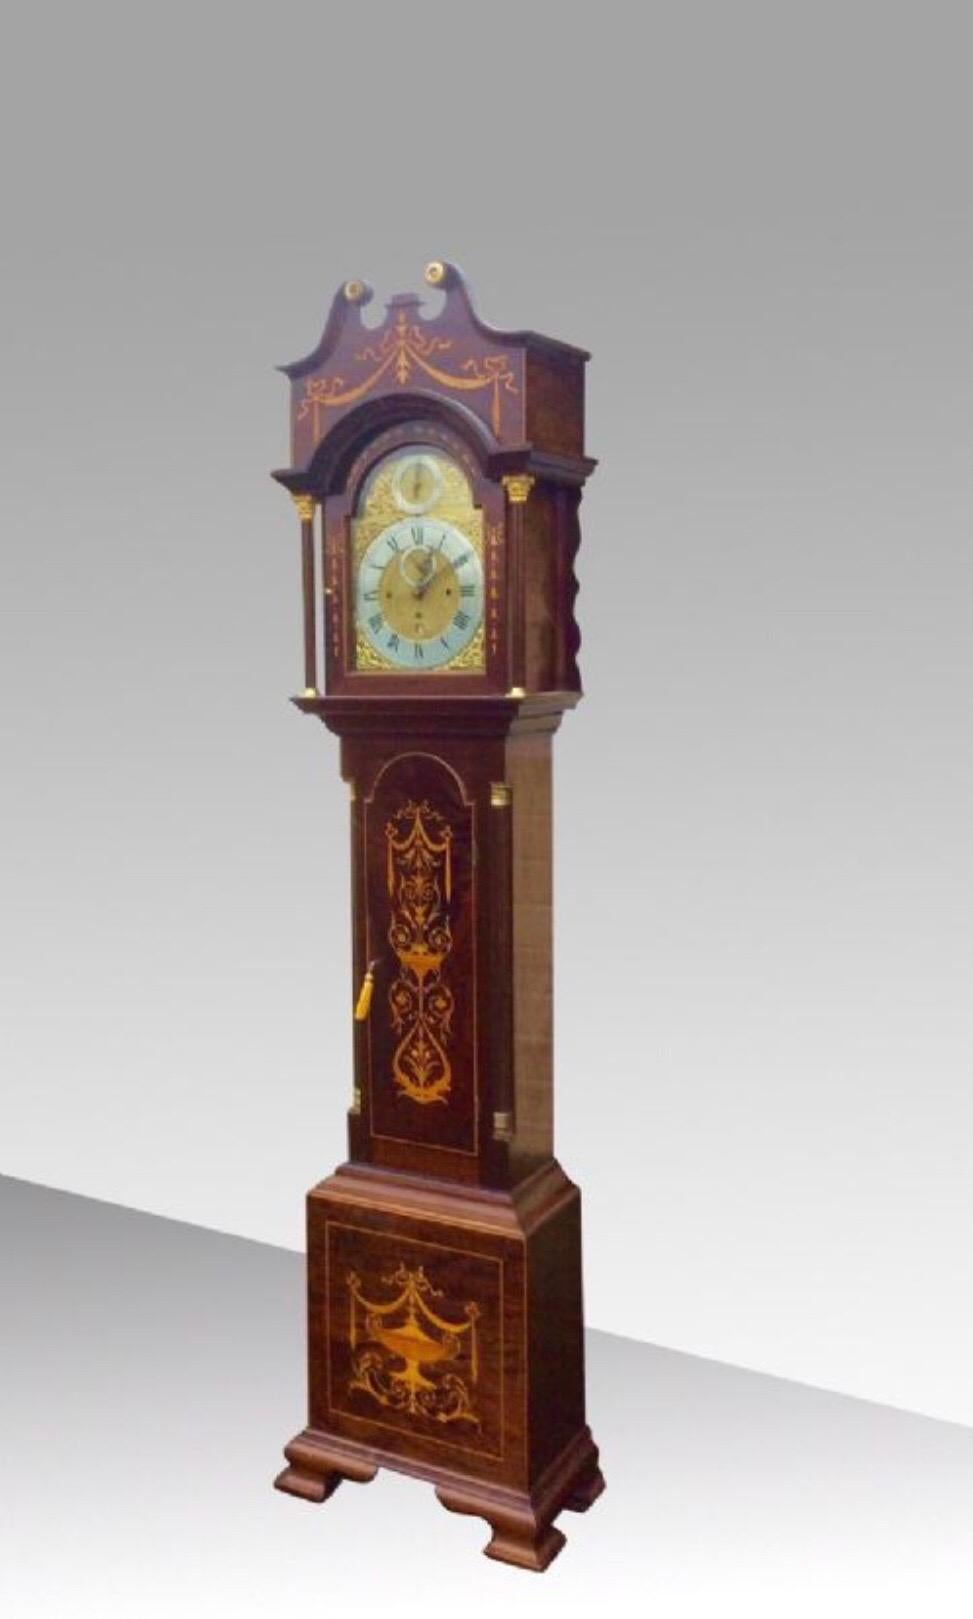 Magnificent Edwardian 8 Day Mahogany Inlaid Marquetry, Brass Arch Dial,Three Train,Antique Longcase Grandfather Clock.Silvered Chapter Ring,Seconds Dial,Chime Silent Dial, Chiming and Striking on Eight/Four Bells and Gong
Measures: 95 ins